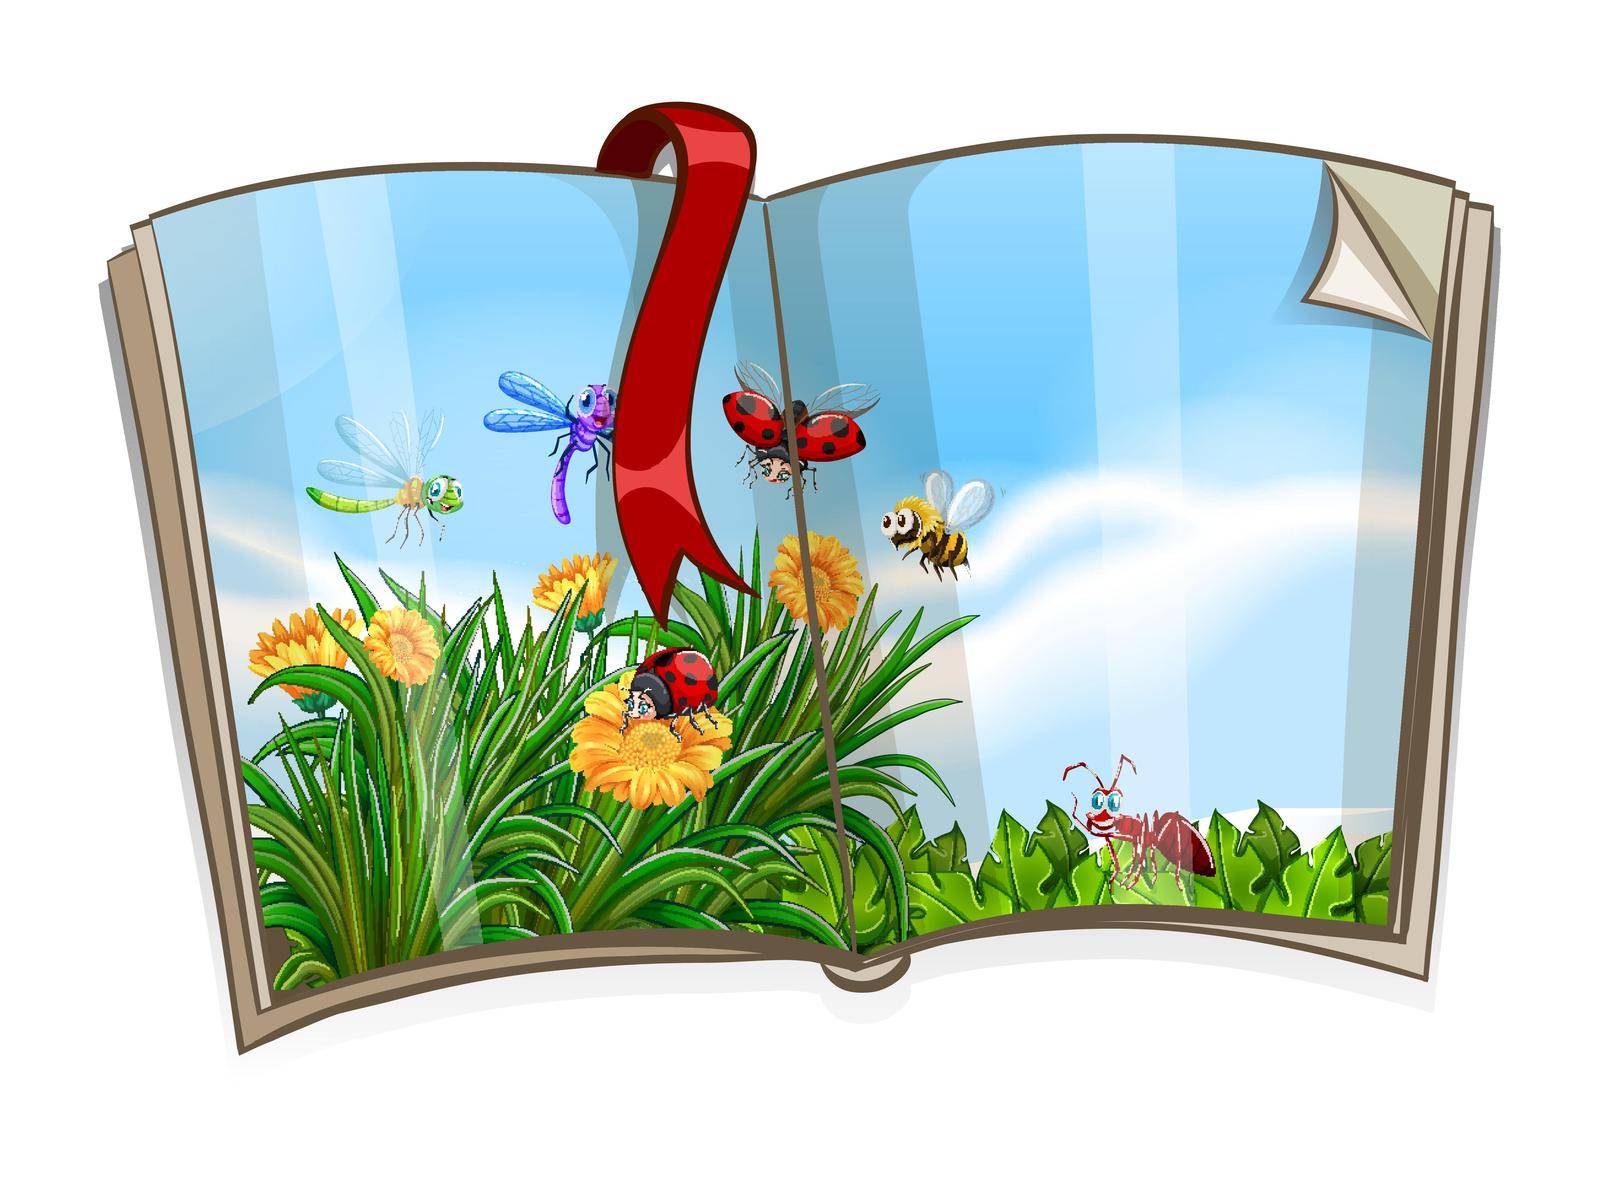 Book with insects flying in garden scene by iimages